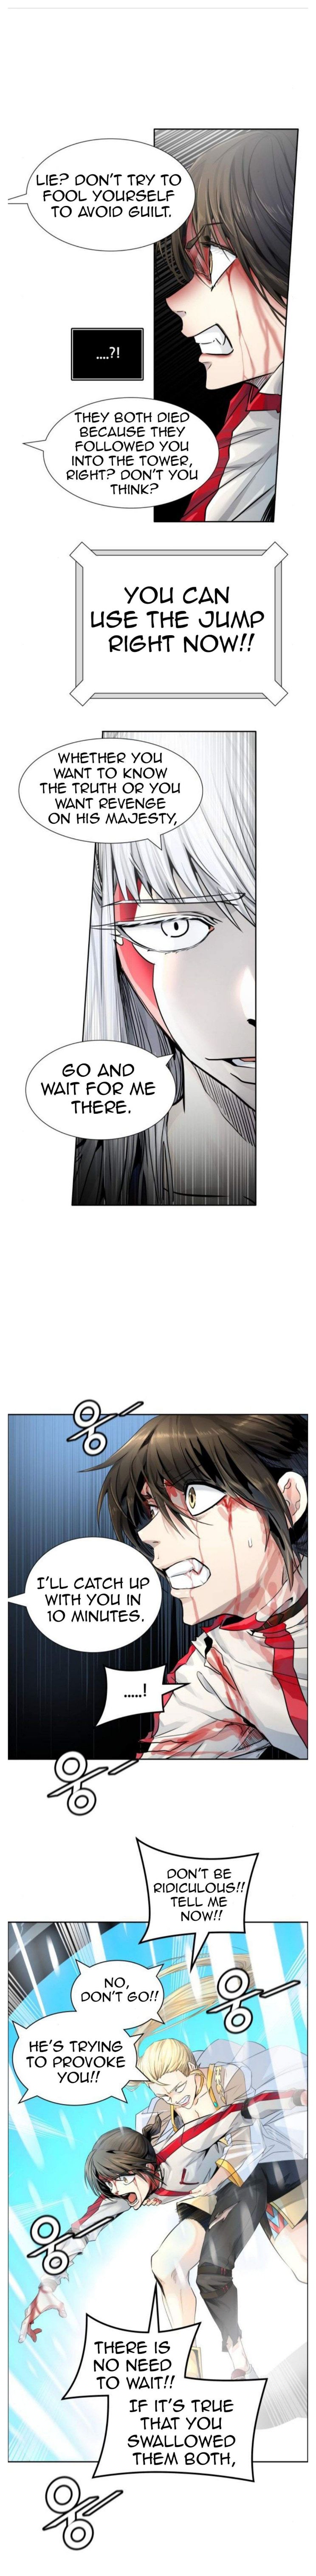 Tower of God Chapter 499, Tower of God 499, Read Tower of God Chapter 499, Tower of God Chapter 499 Manga, Tower of God Chapter 499 english, Tower of God Chapter 499 raw manga, Tower of God Chapter 499 online, Tower of God Chapter 499 high quality, Tower of God 499 chapter, Tower of God Chapter 499 manga scan